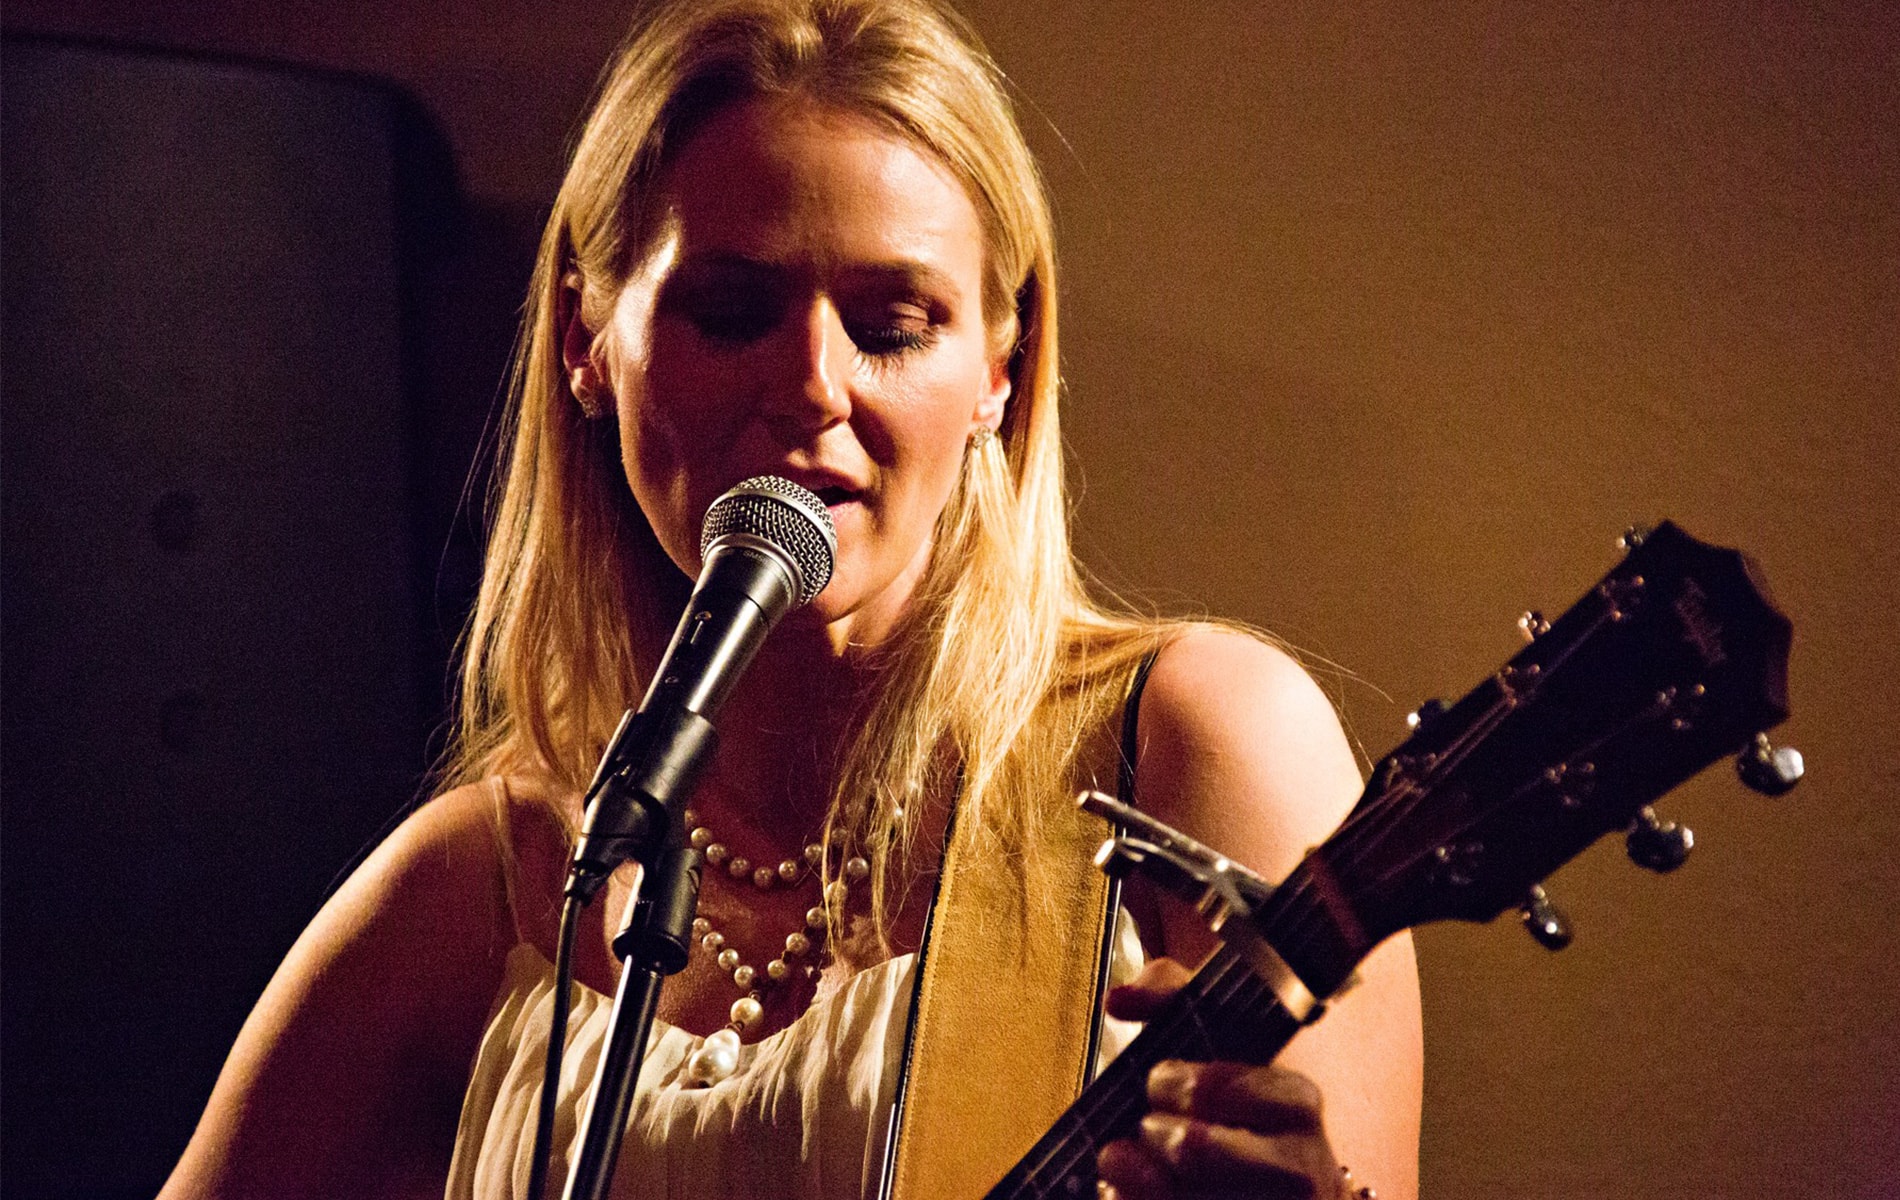 Recording artist Jewel performs at Restaurant Paradis benefiting The Ohana Institute on November 11, 2016, in Rosemary Beach, Florida.